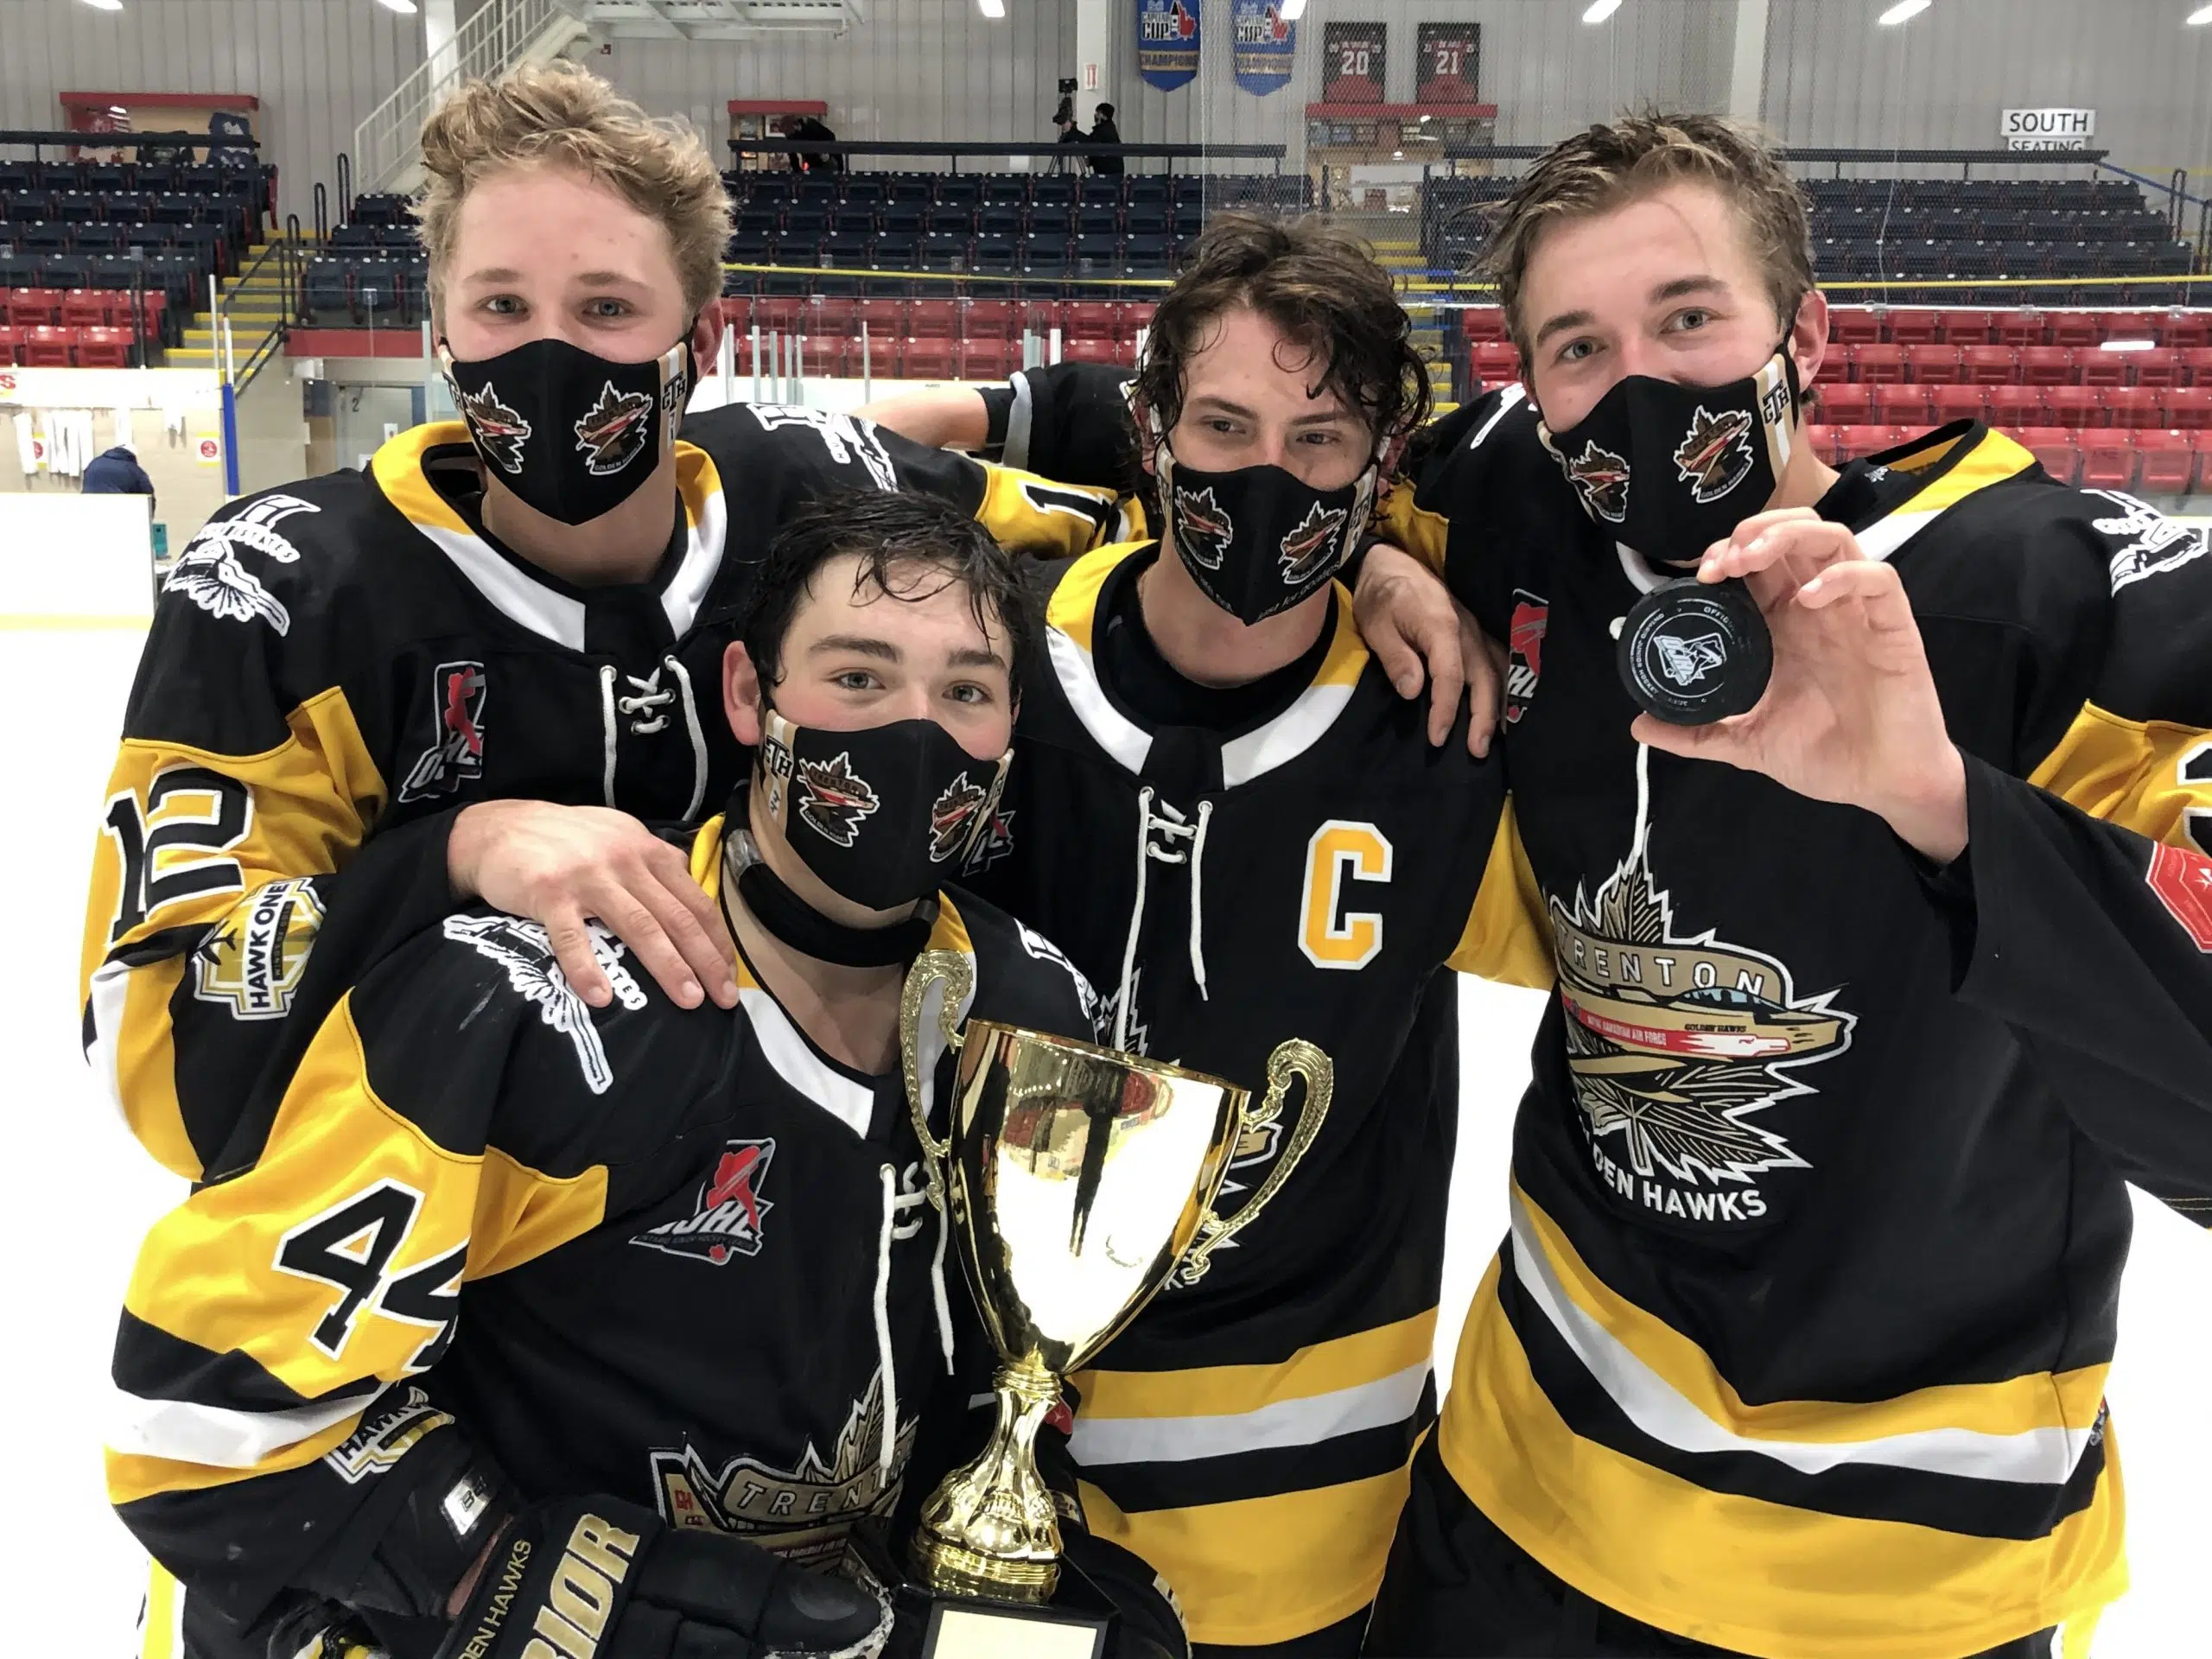 G-Hawks hoist the Hasty Ps Cup